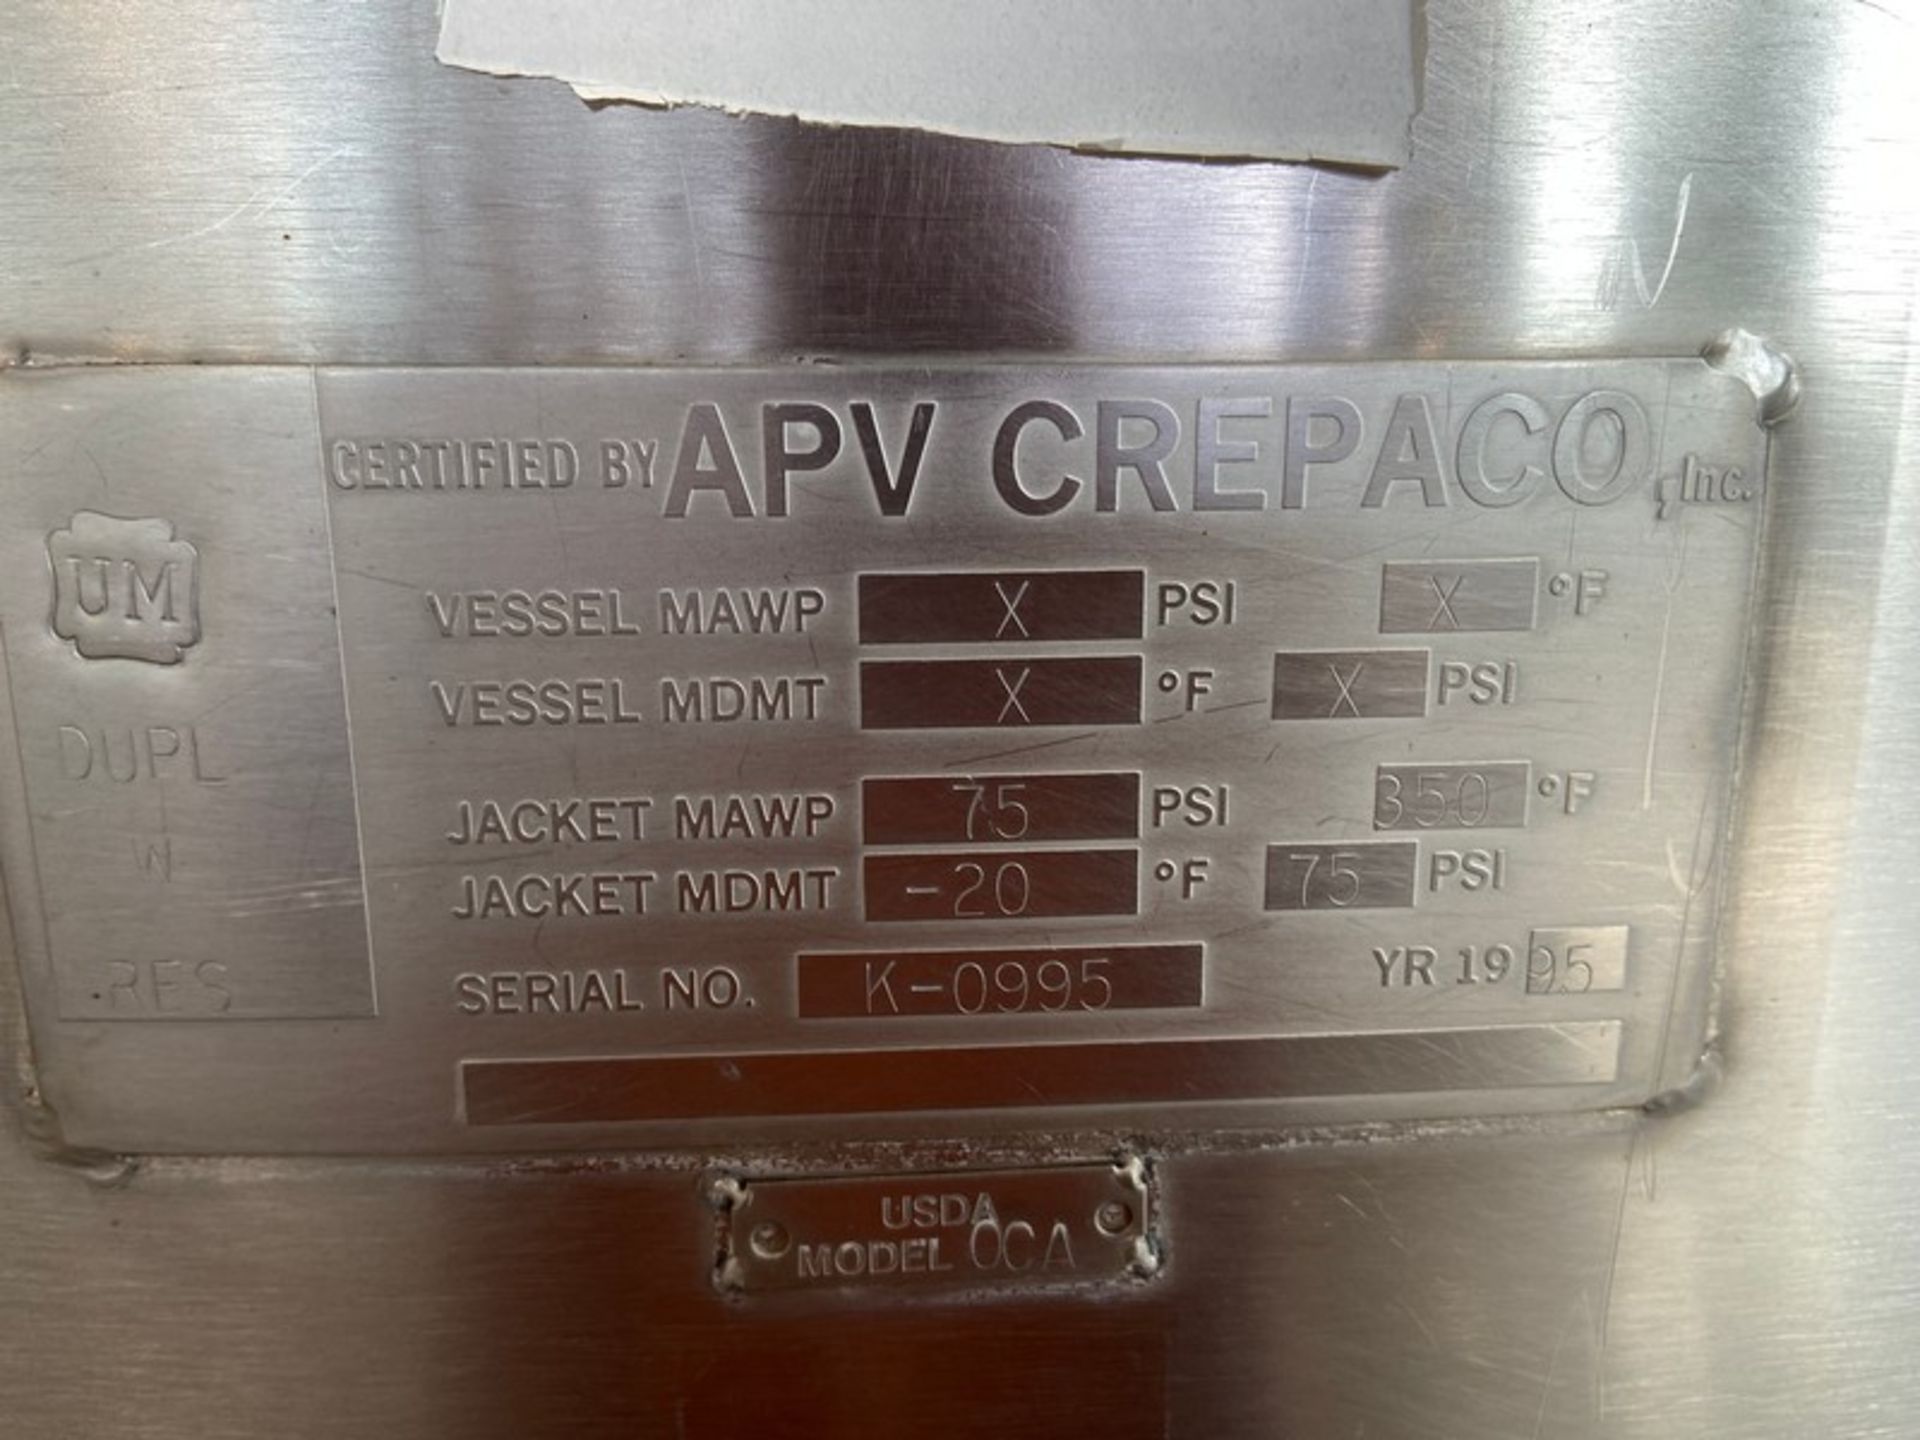 APV Crepaco S/S Cone Kettle, S/N K-0995, Jacket MAWP 75 PSI @ 350 F, Jacket MDMT -20 F 75 PSI, - Image 12 of 12